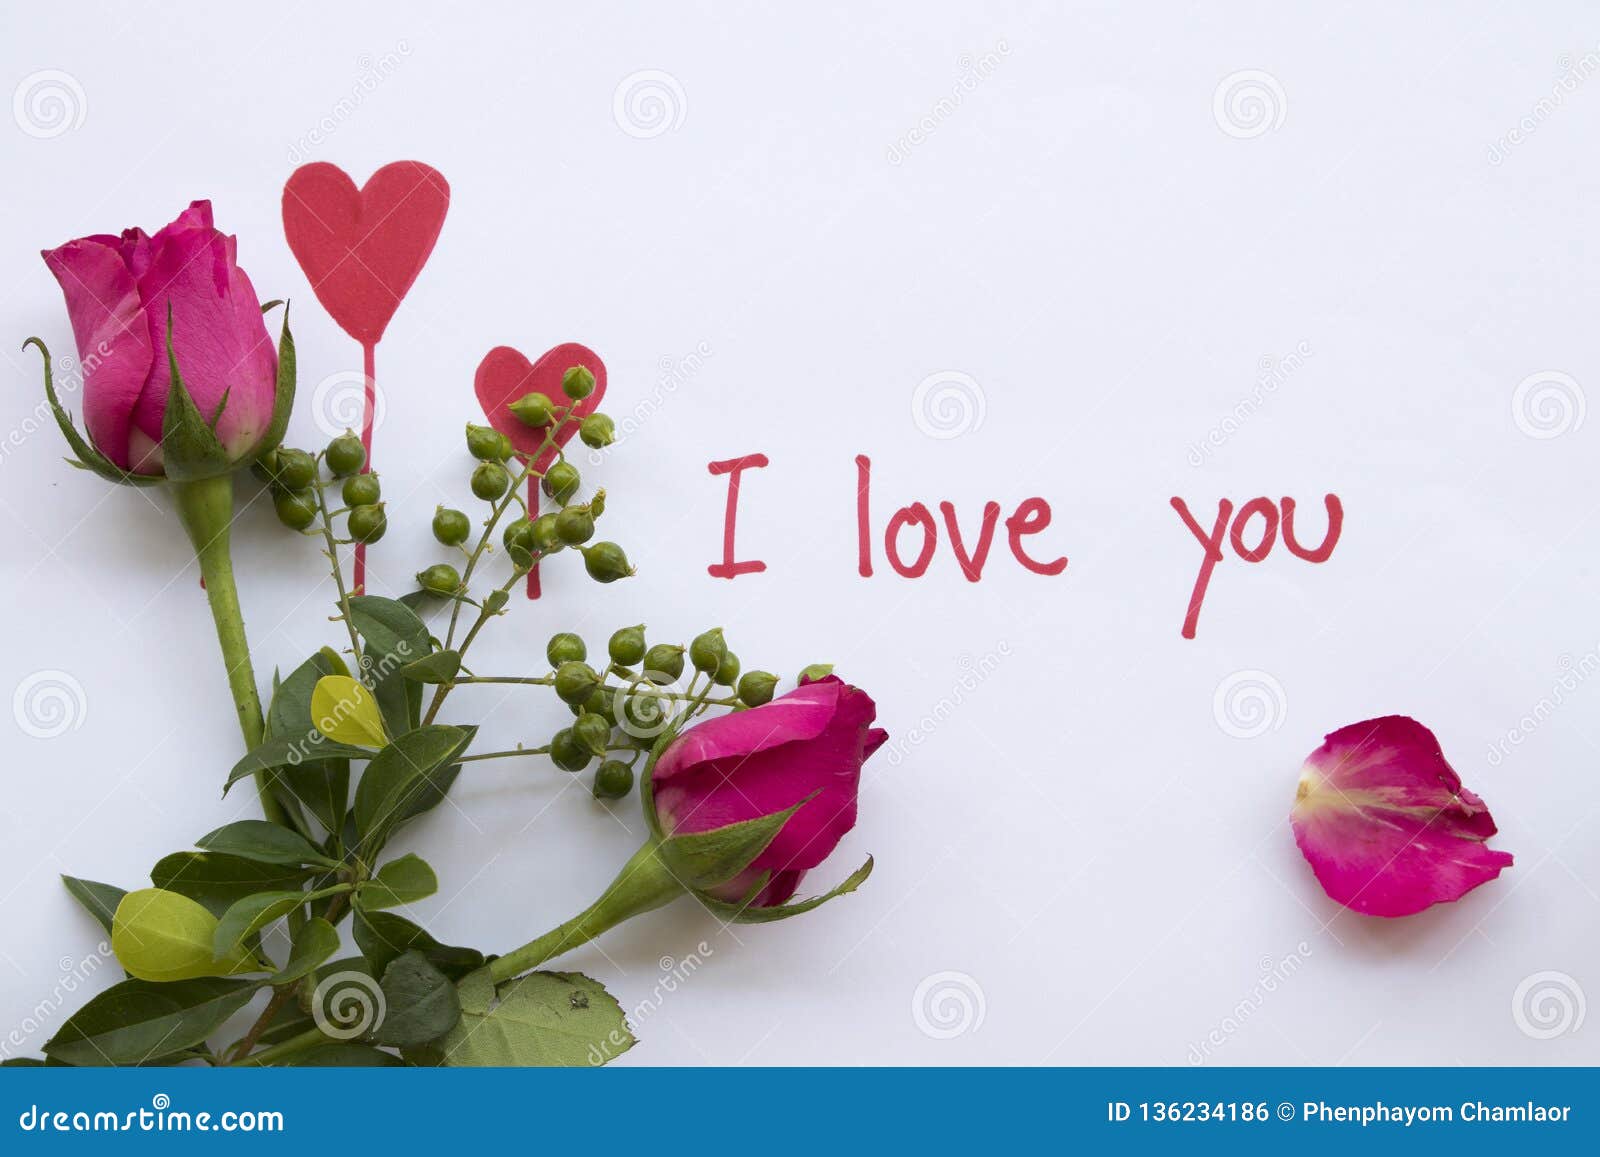 I Love You Message Card with Draw Red Heart Stock Photo - Image of ...